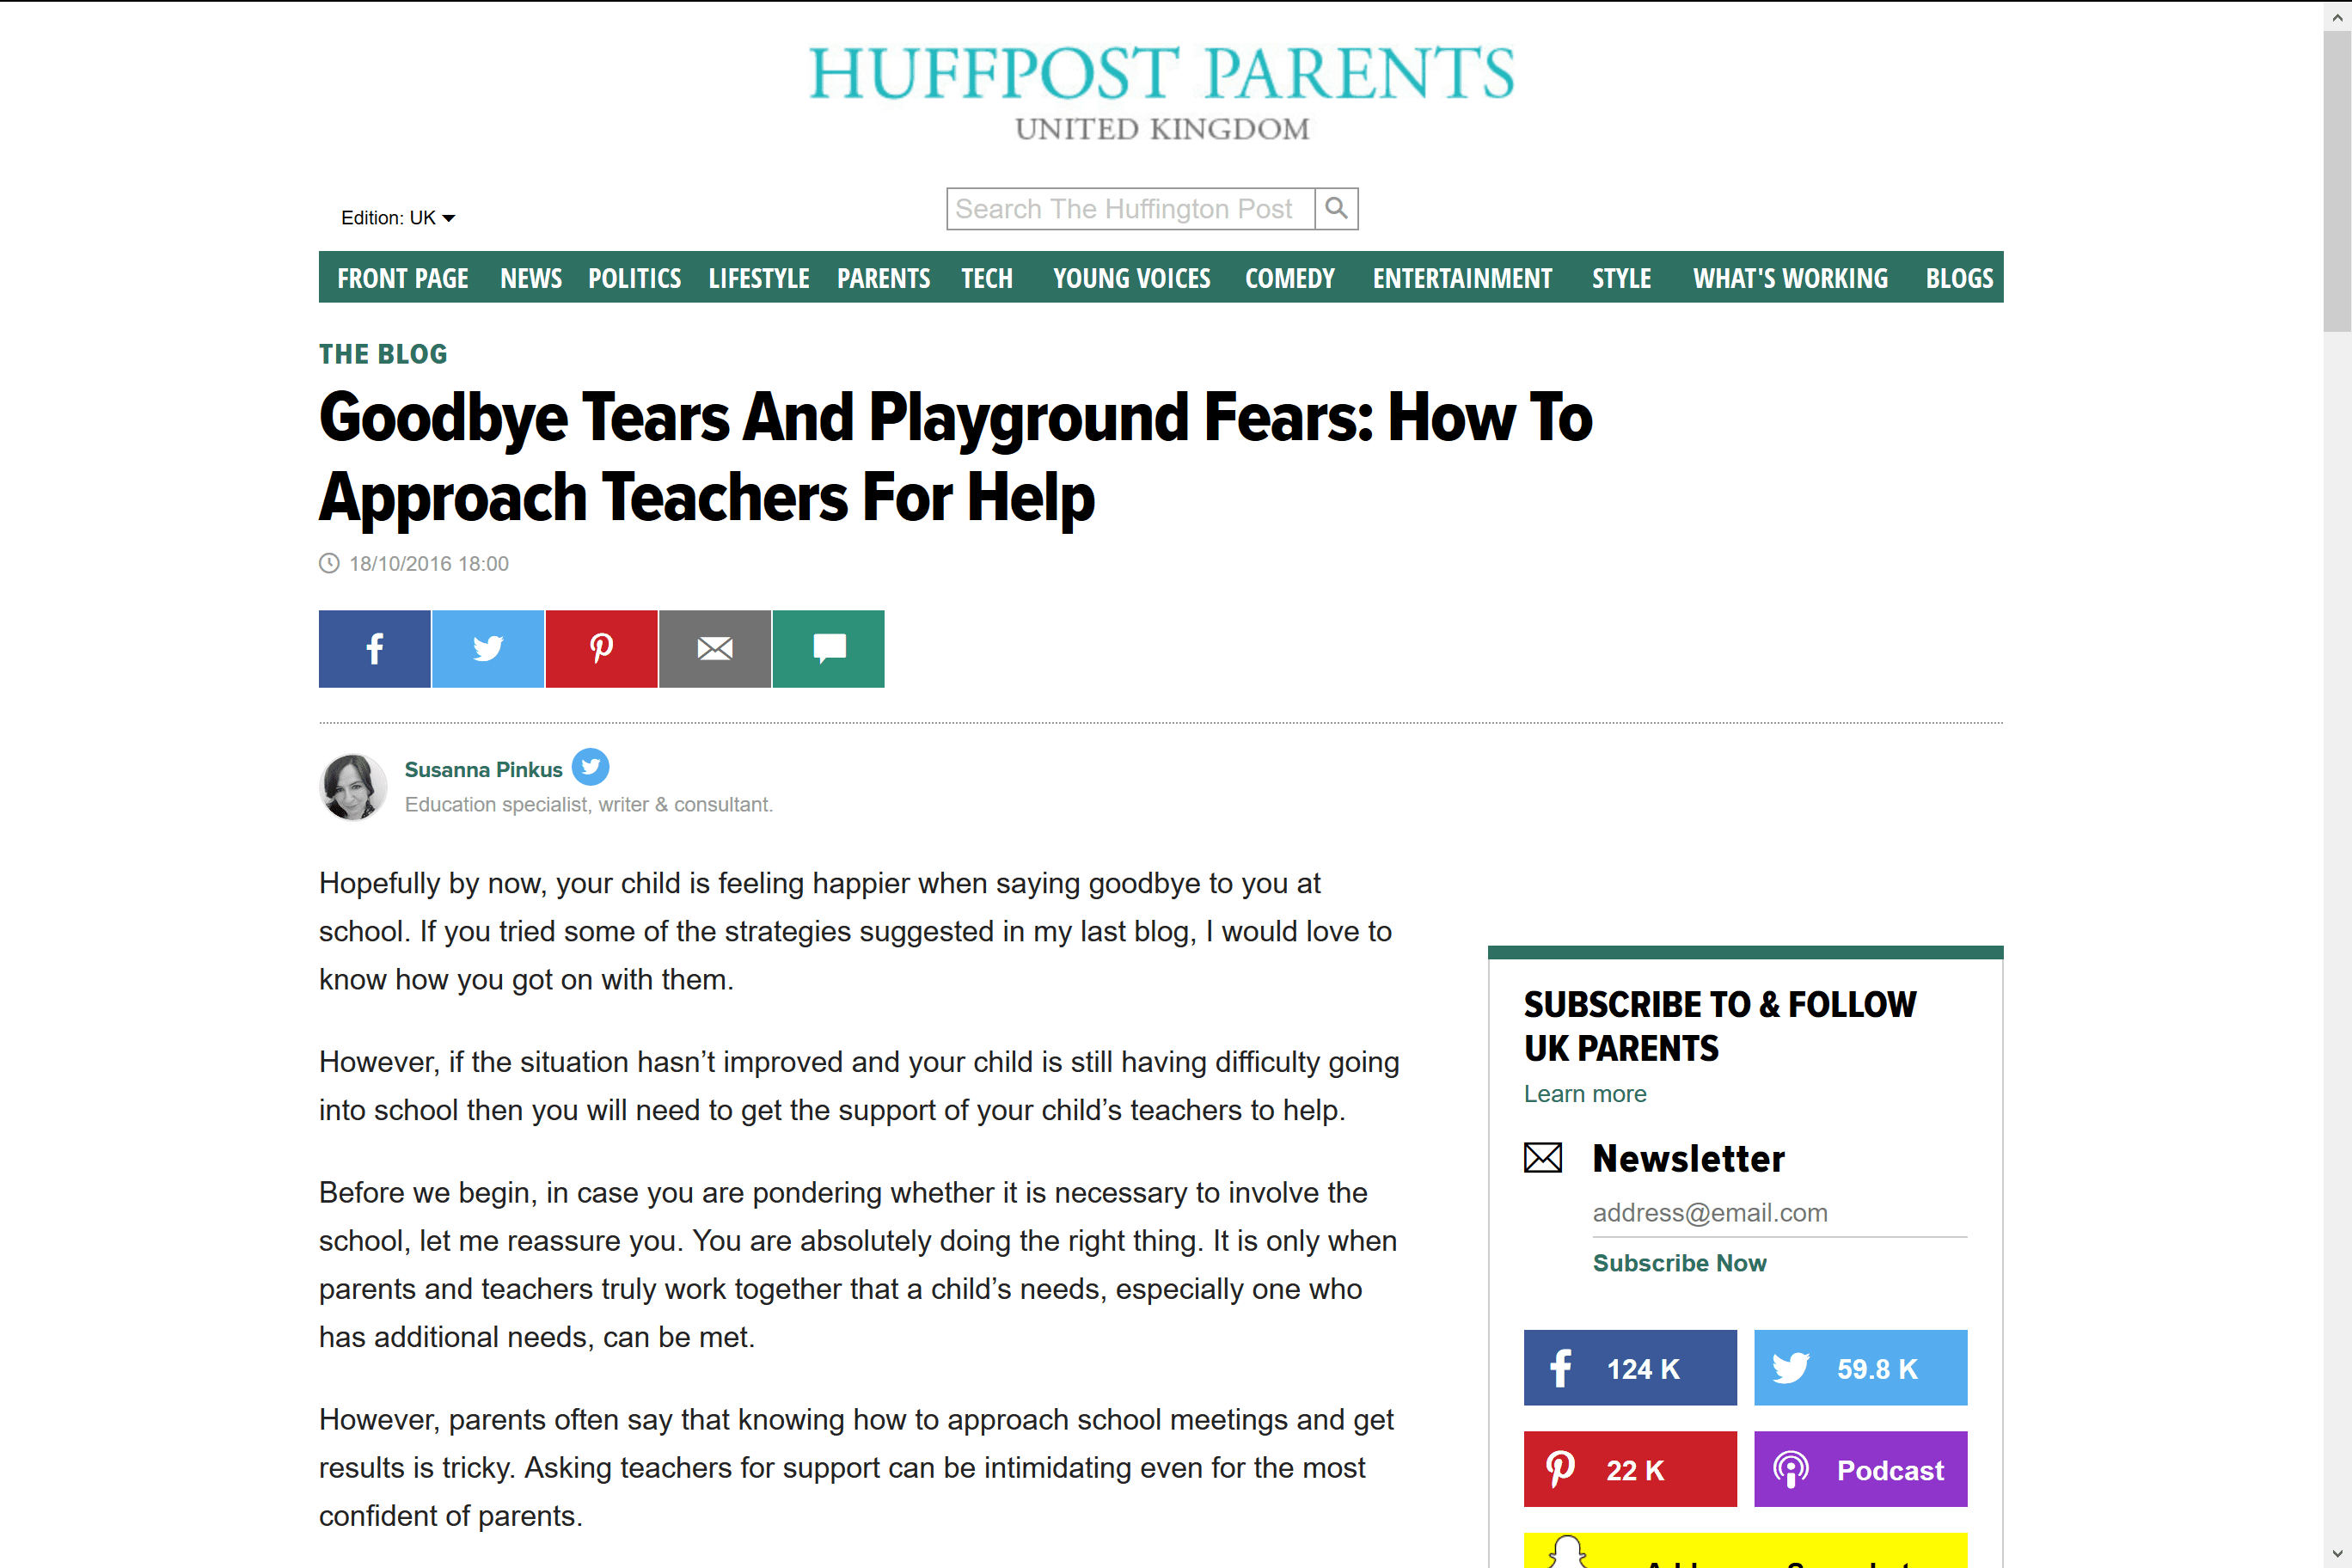 Screenshot of goodbye tears and playground fears: how to approach teachers for help article